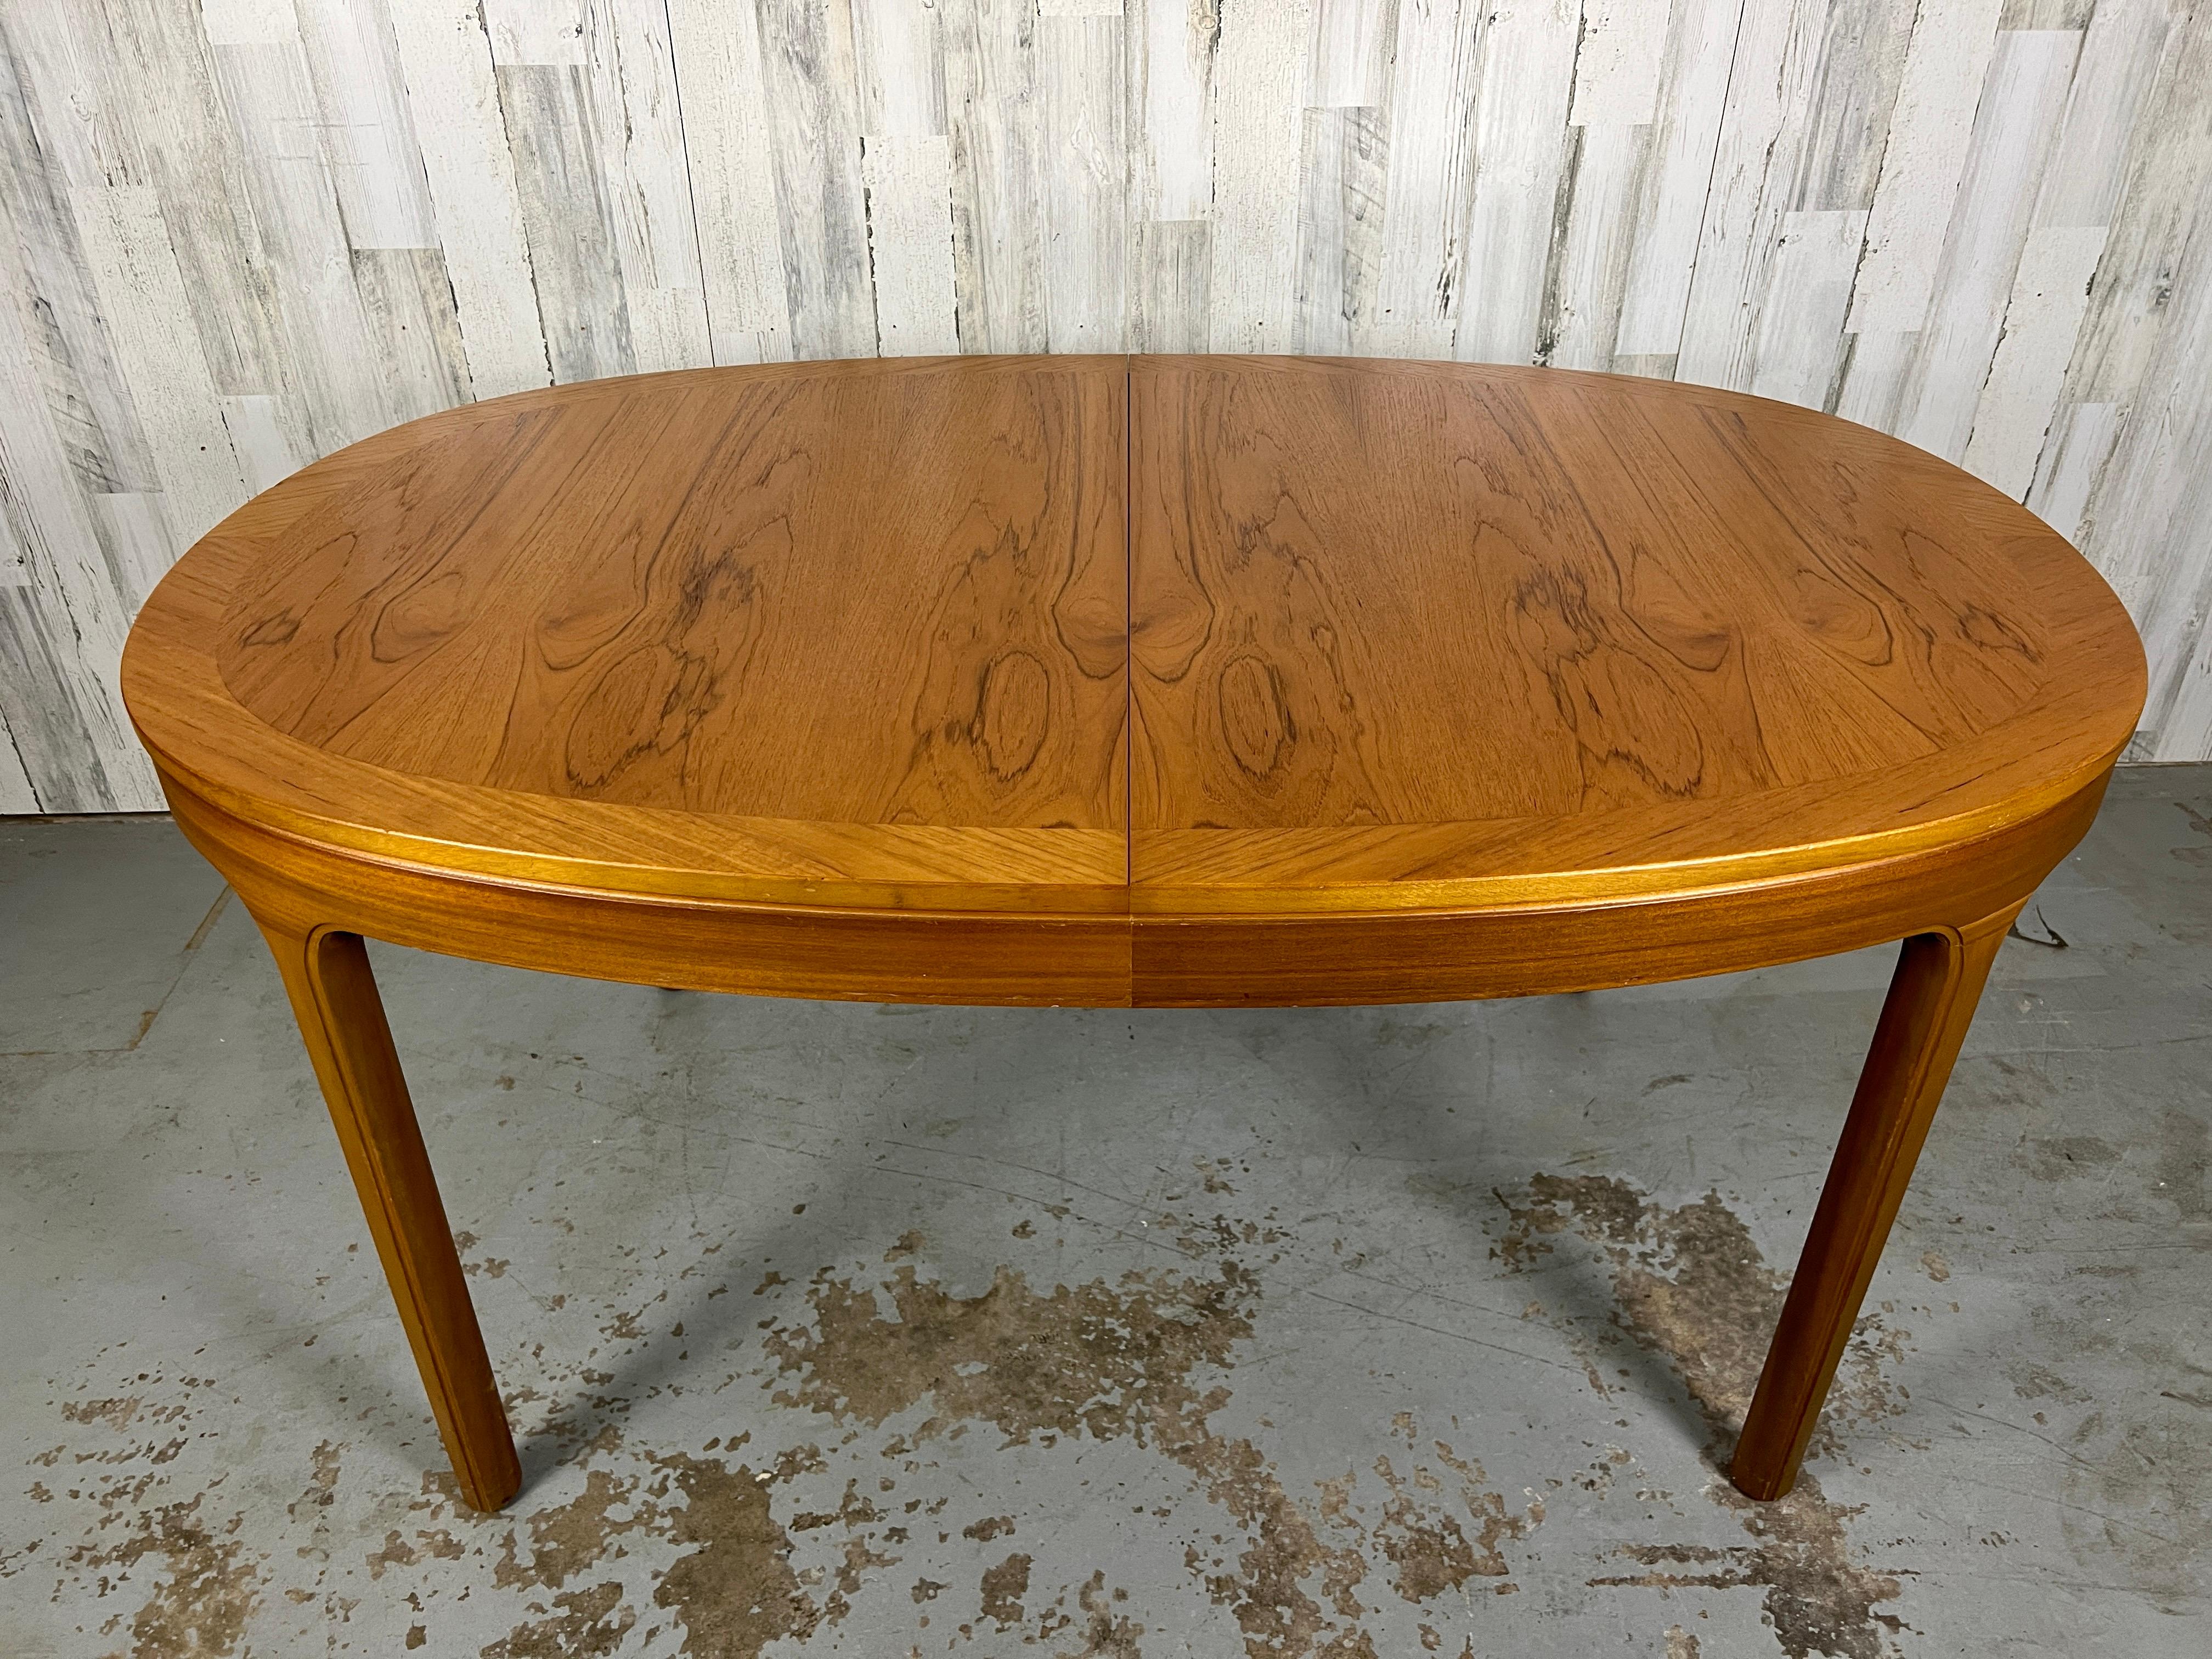 Oval teak dining table by Nathan Furniture with an extendable butterfly leaf. 

81 wide 39 deep 29 3/4 high- leaf in
21 wide leaf
No leaf 60 wide.